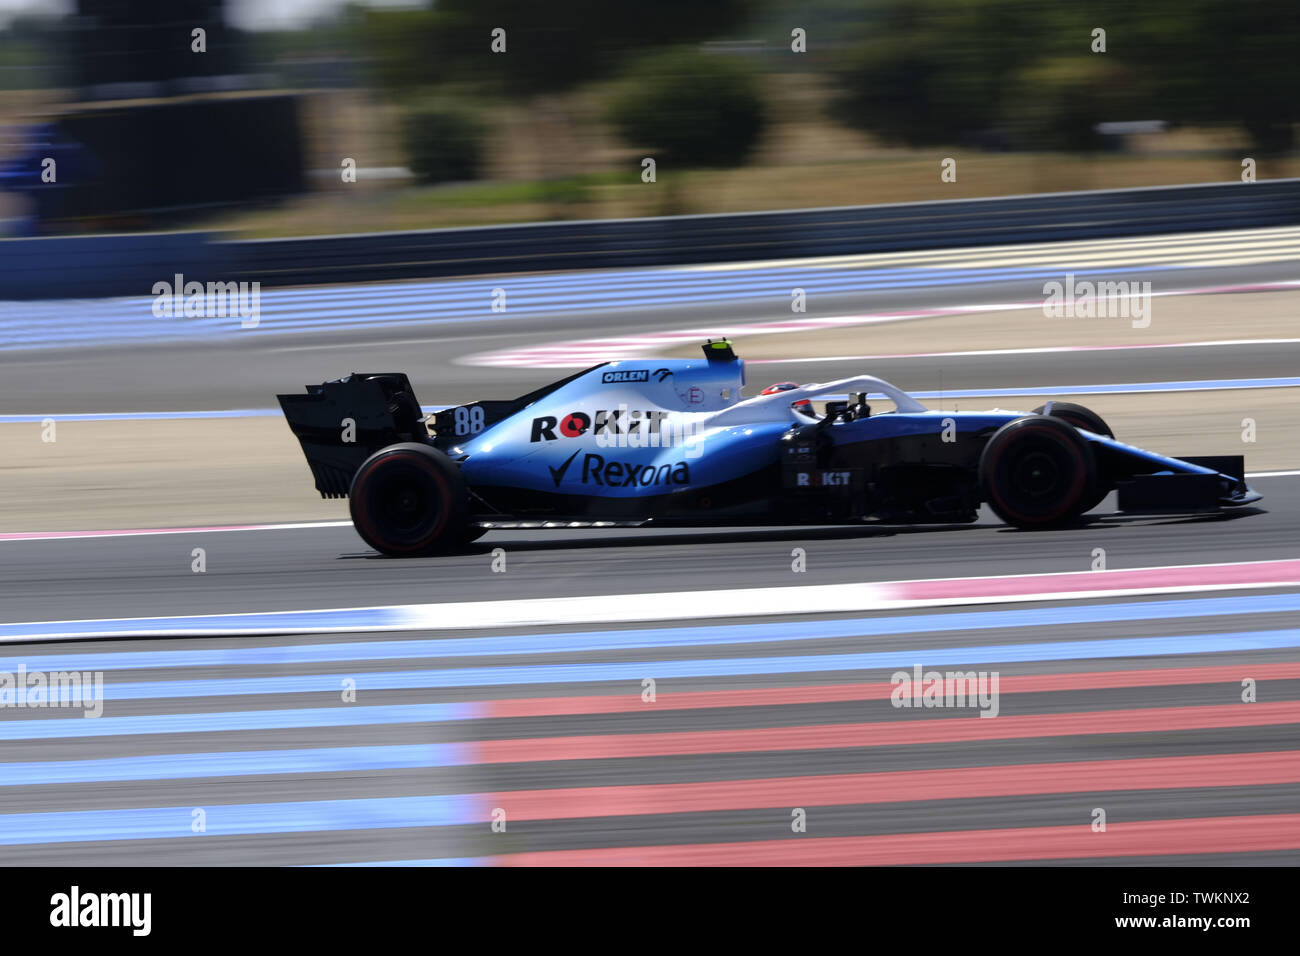 Le Castellet, Var, France. 21st June, 2019. Williams Driver ROBERT KUBICA  (POL) in action during the Formula one French Grand Prix at the Paul Ricard  circuit at Le Castellet - France Credit: